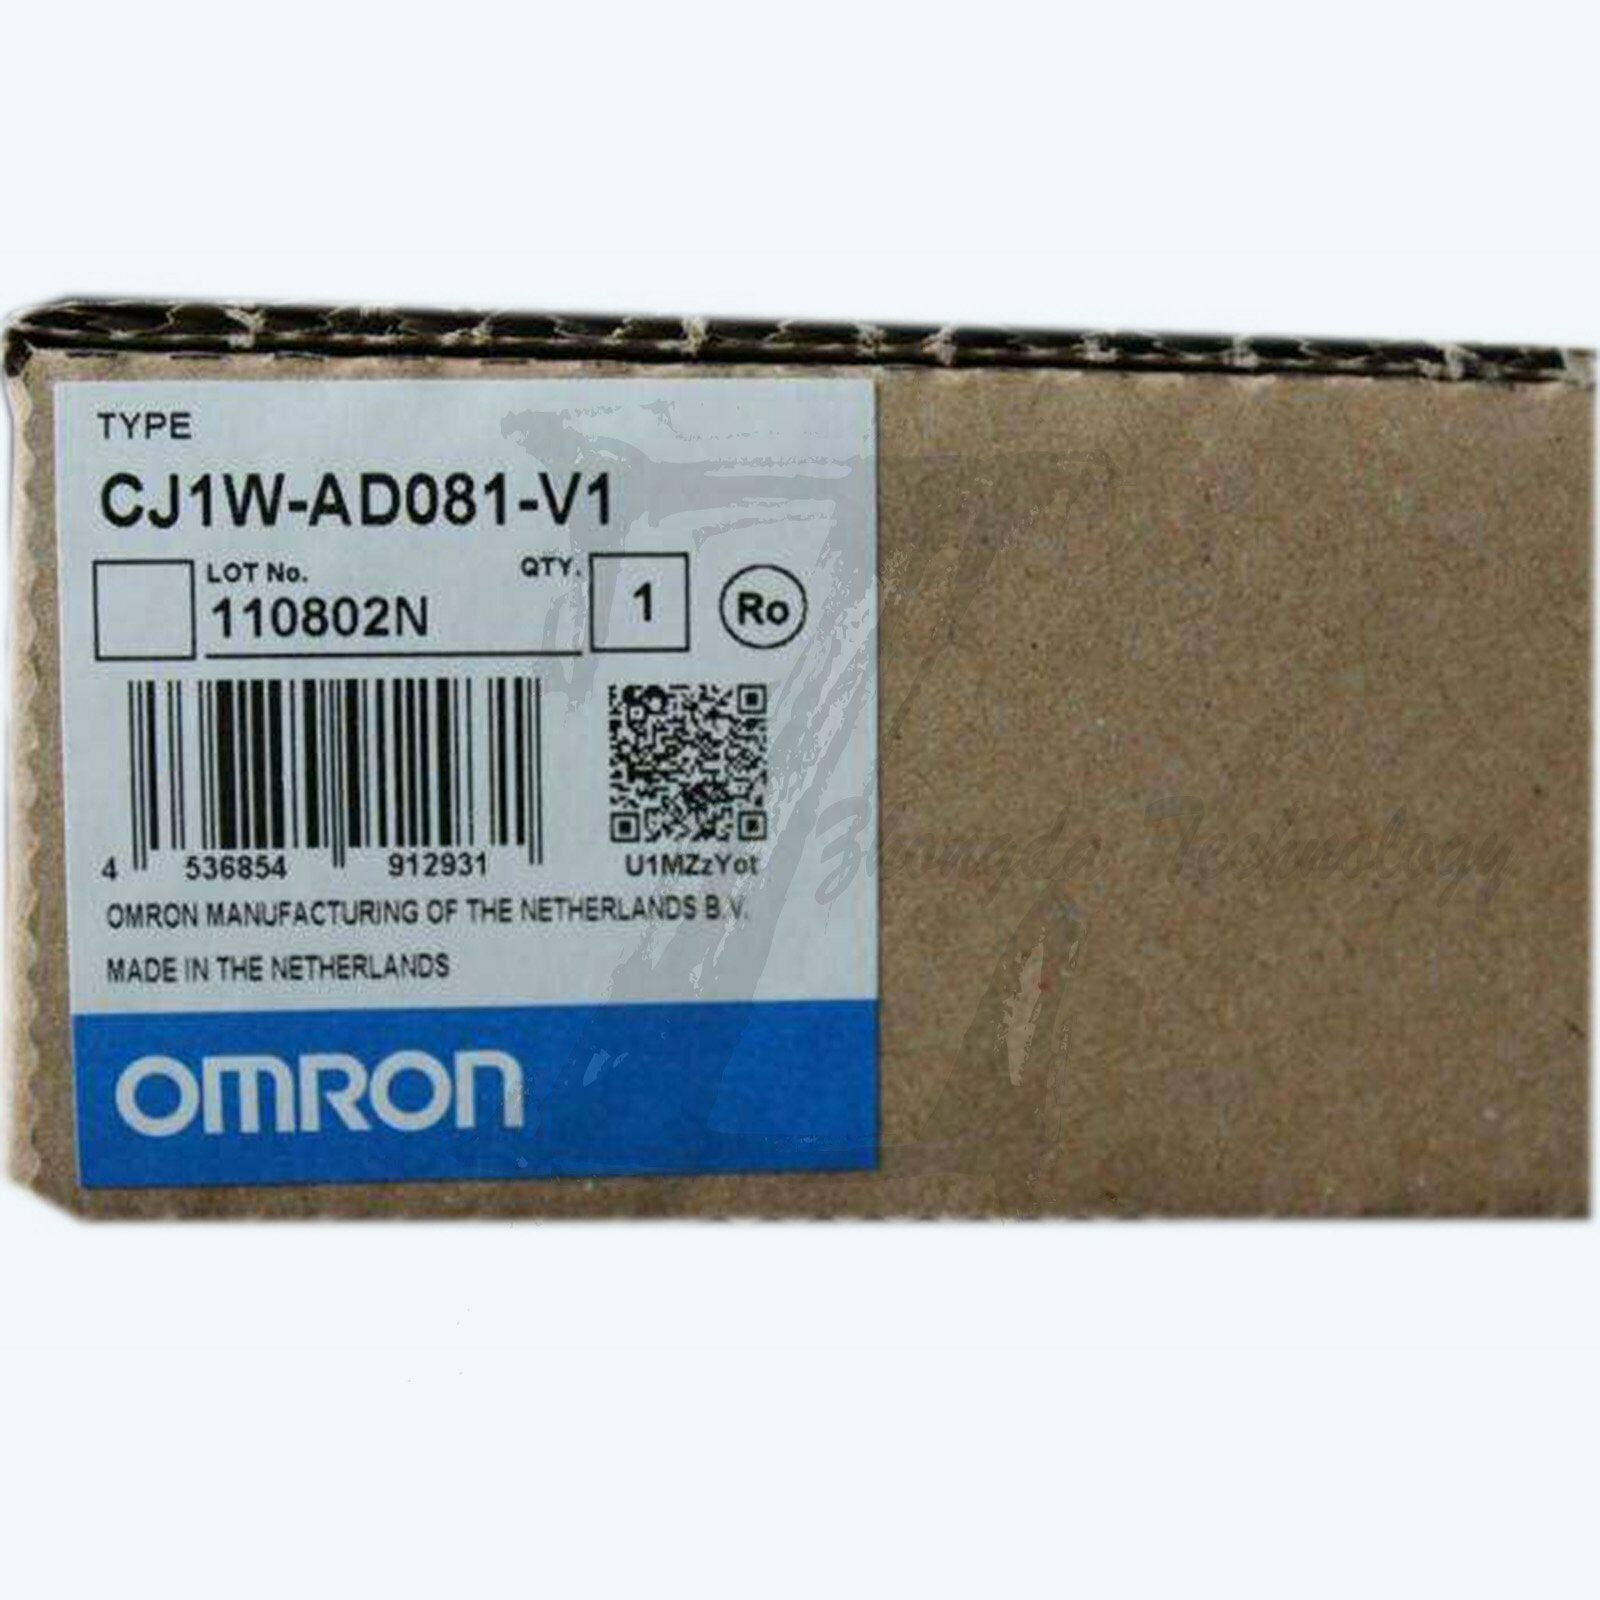 1pc new Omron analog input unit CJ1W-AD081-V1 one year warranty KOEED 201-500, 80%, import_2020_10_10_031751, Omron, Other